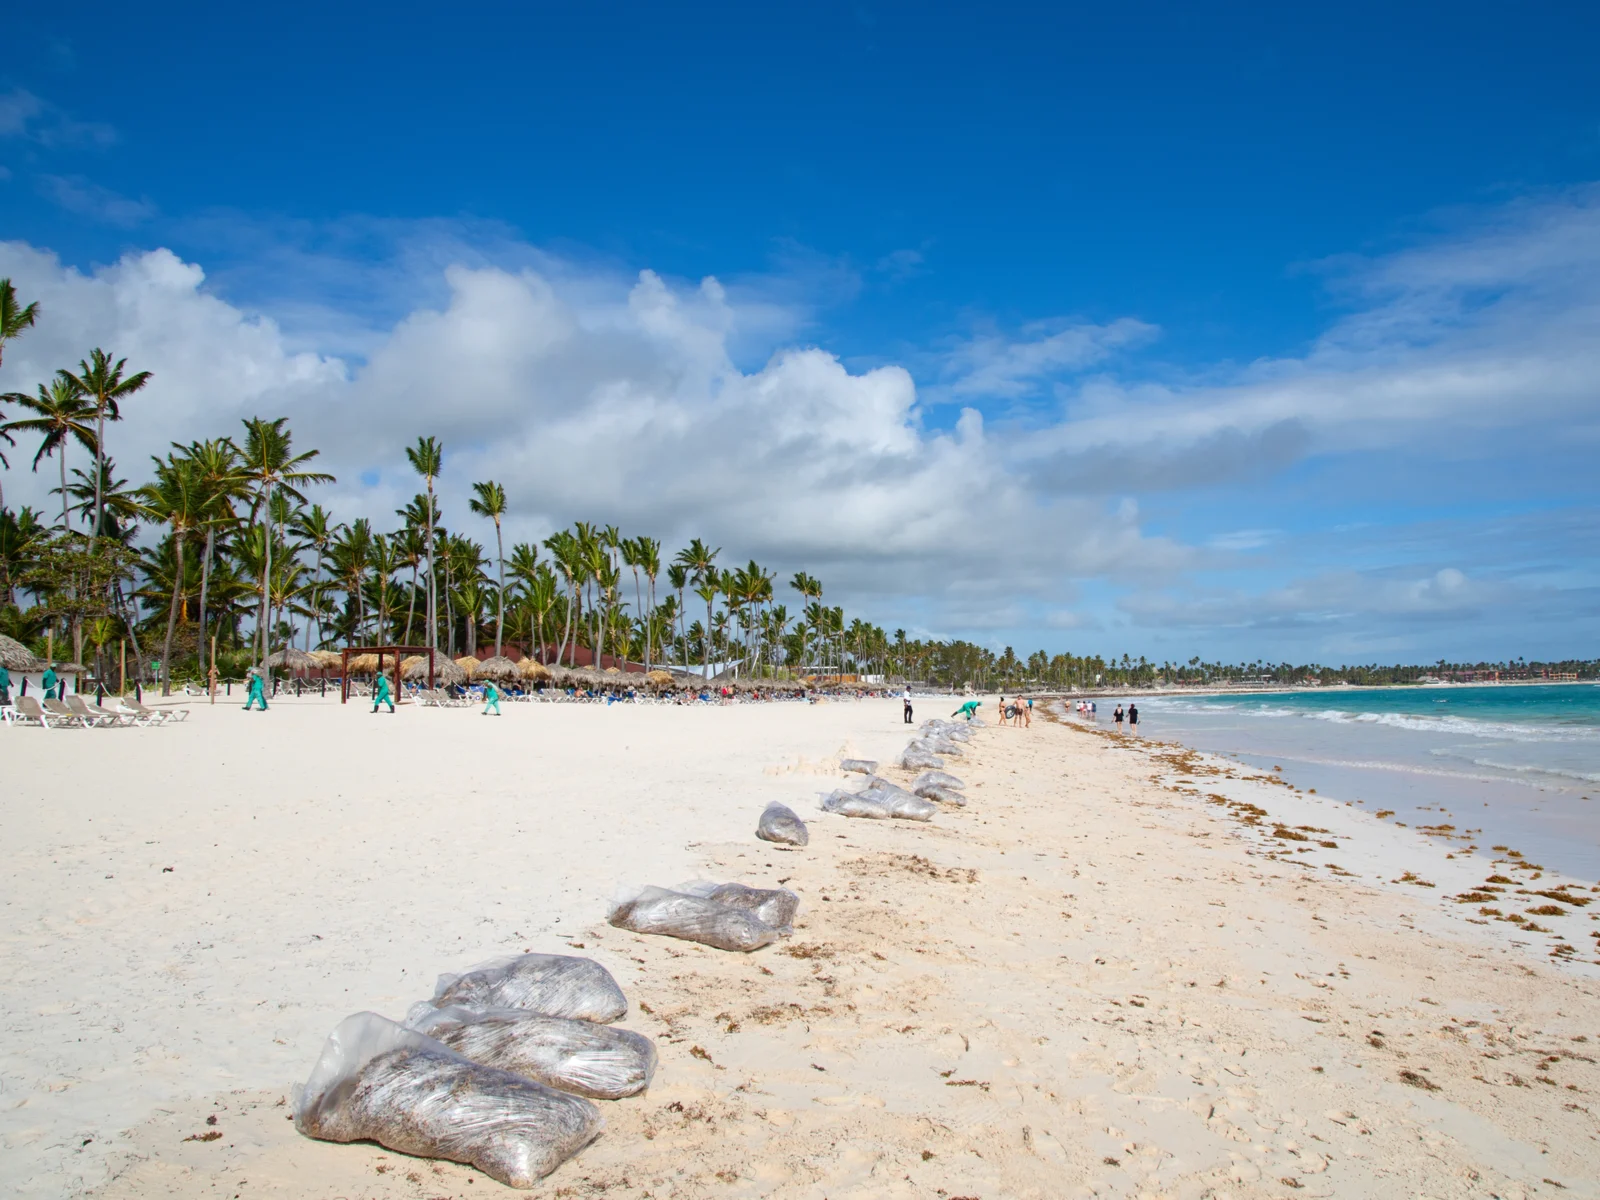 The aftermath of the seaweed cleanup at one of the best beaches in the Dominican Republic, Punta Cana